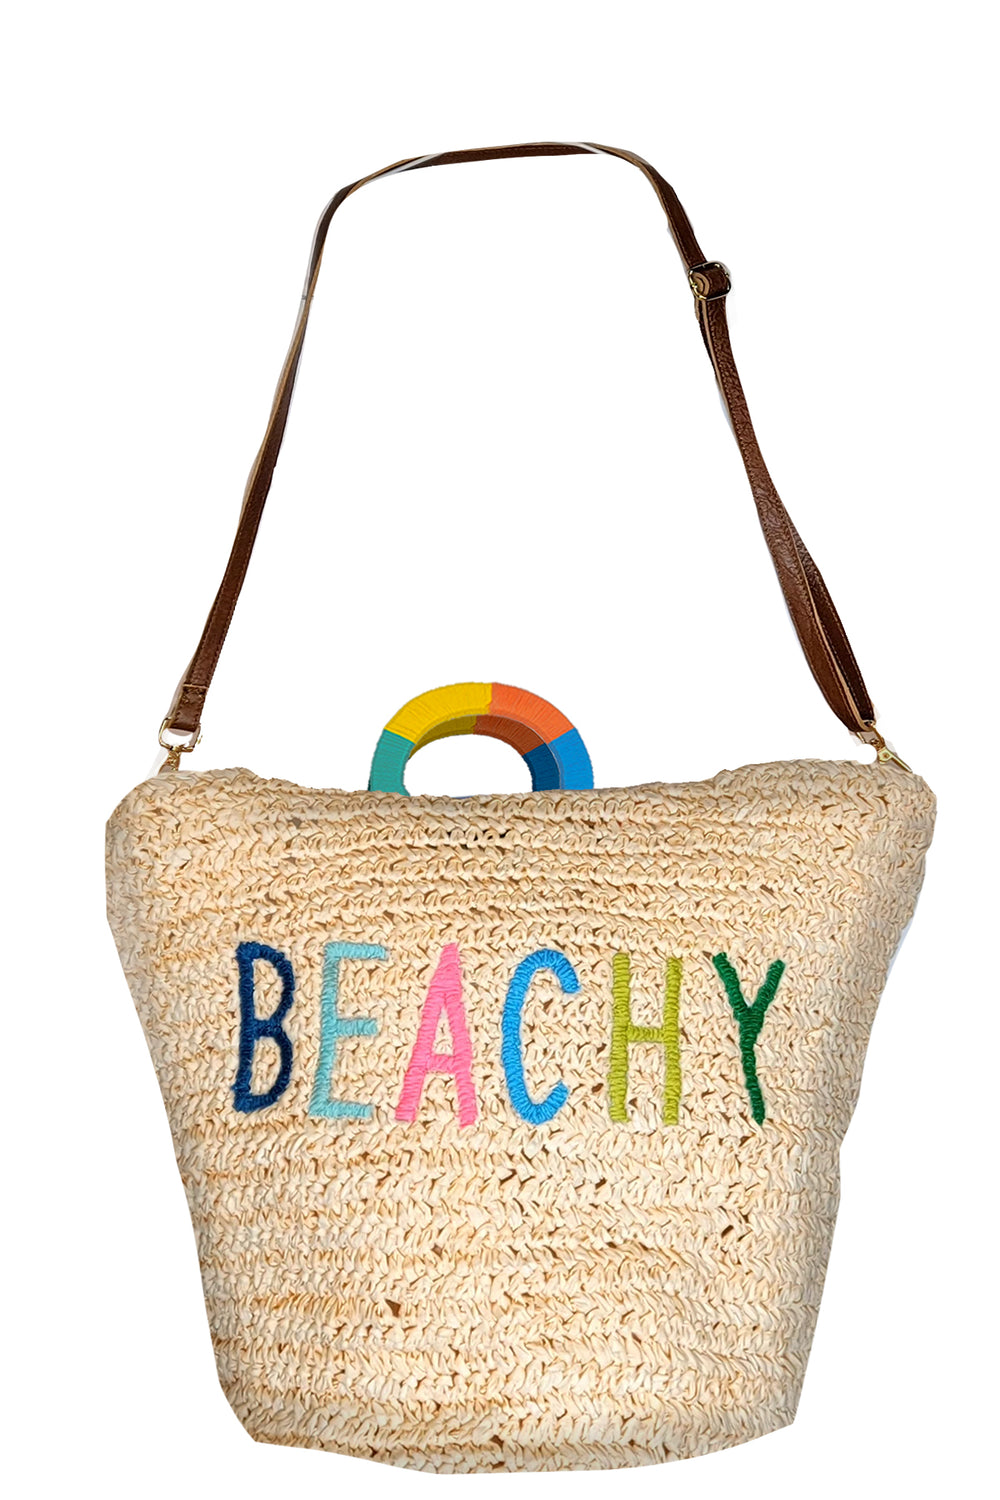 Under the Palms Tote Bag - Beachy Embroidery